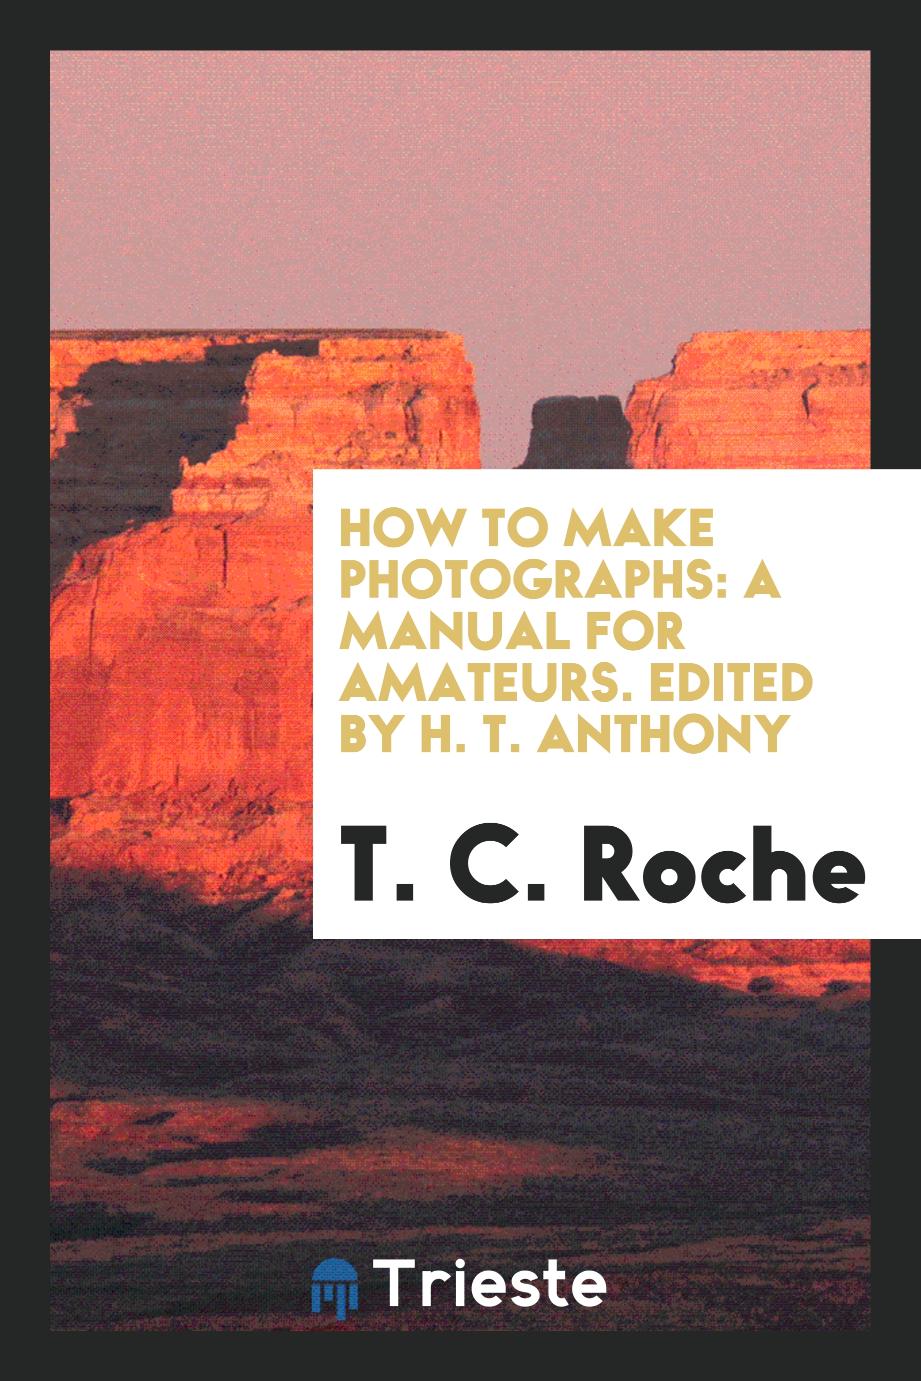 How to Make Photographs: A Manual for Amateurs. Edited by H. T. Anthony